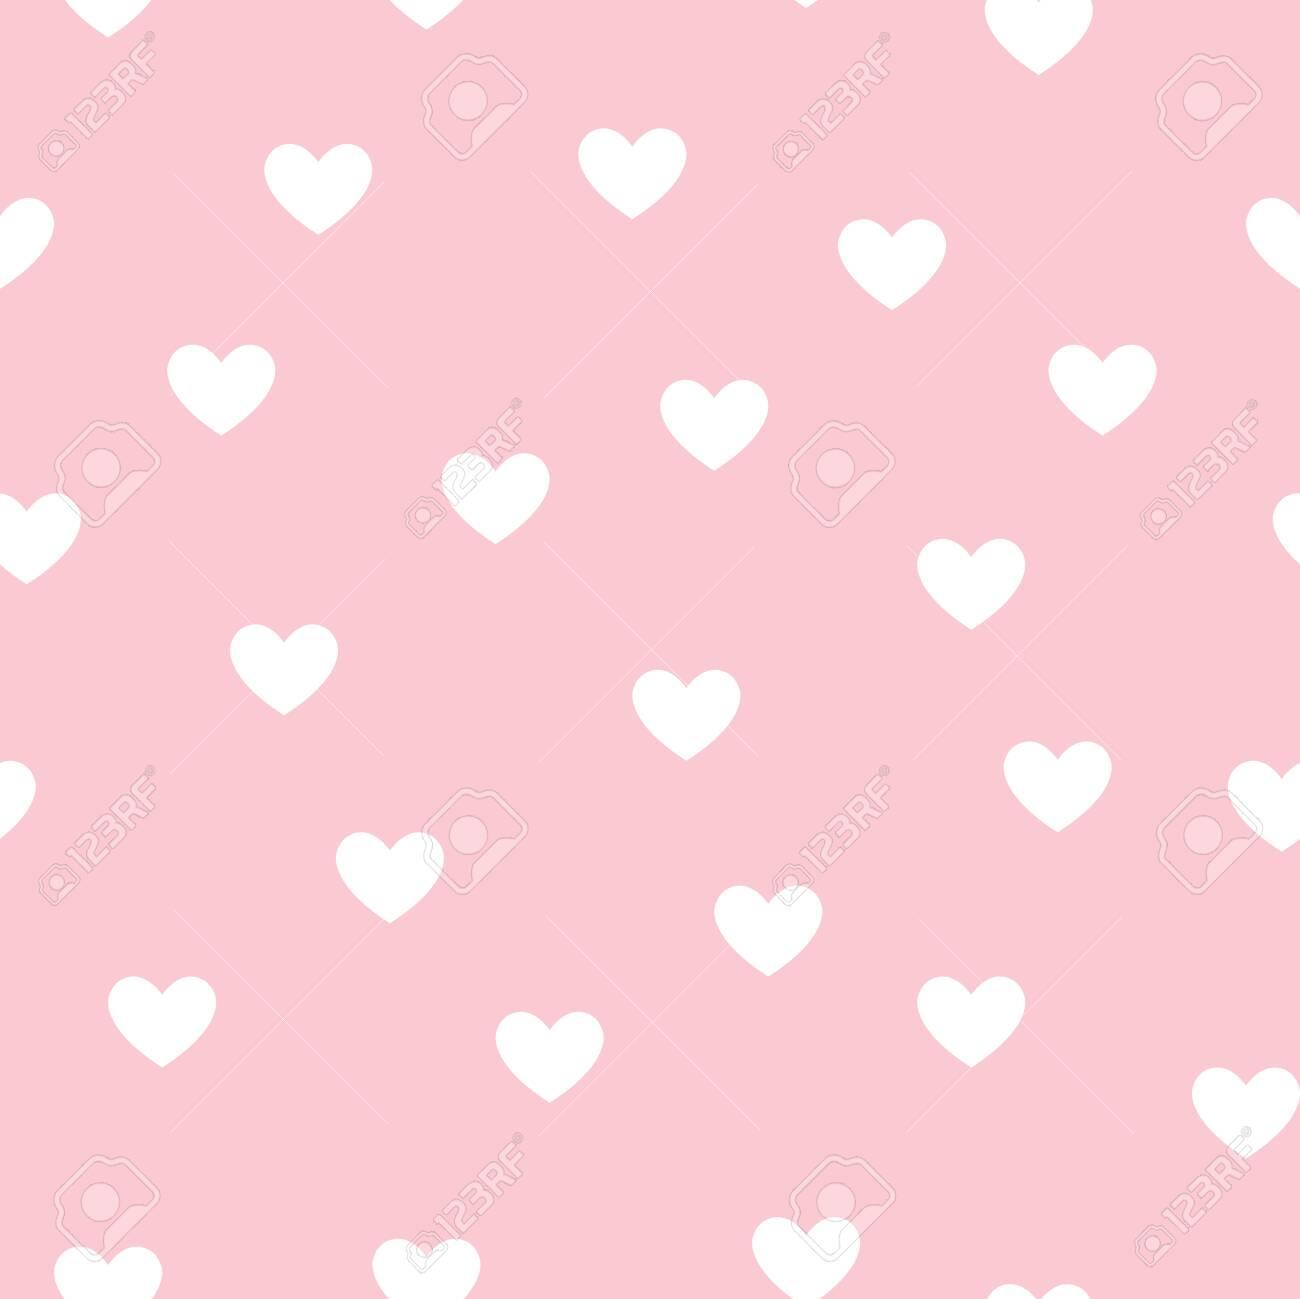 Cute White Hearts On Pink Background Seamless Repeat Pattern